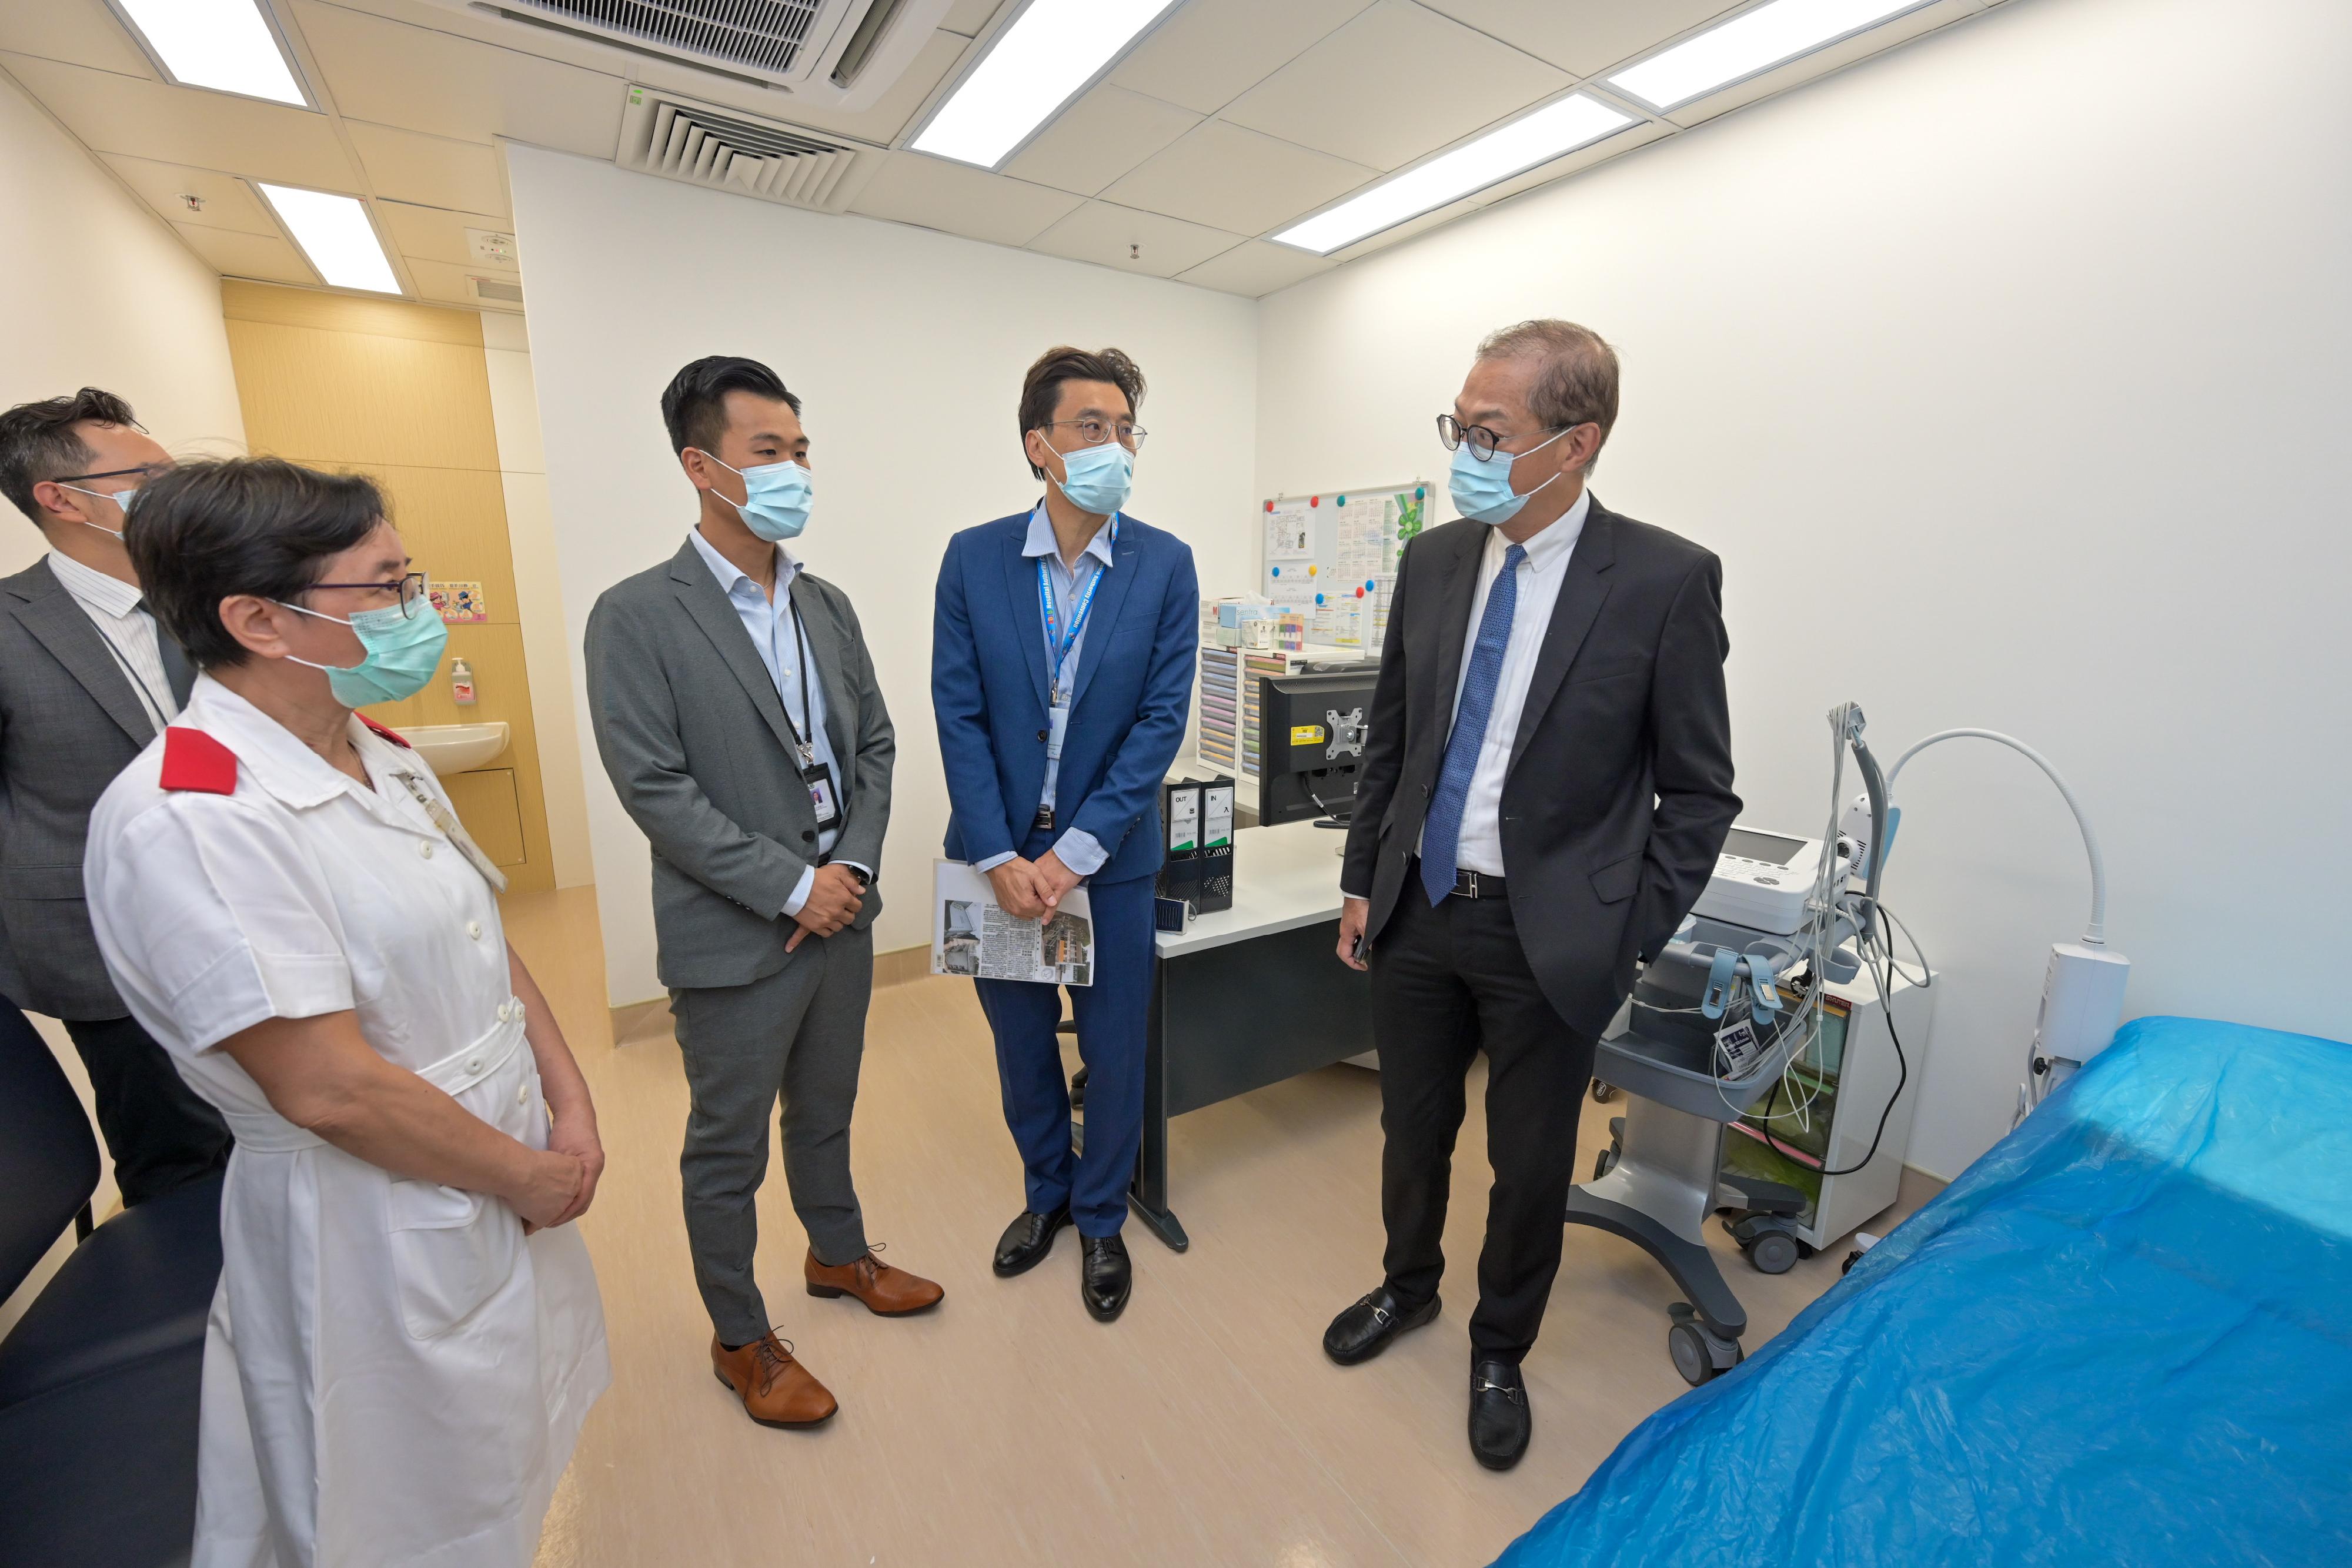 The Secretary for Health, Professor Lo Chung-mau, visited the Shek Kip Mei Health Centre and the temporary Shek Kip Mei General Out-patient Clinic this morning (September 27). Photos shows Professor Lo (first right) learning from staff members about the daily operation of the temporary Shek Kip Mei General Out-patient Clinic.